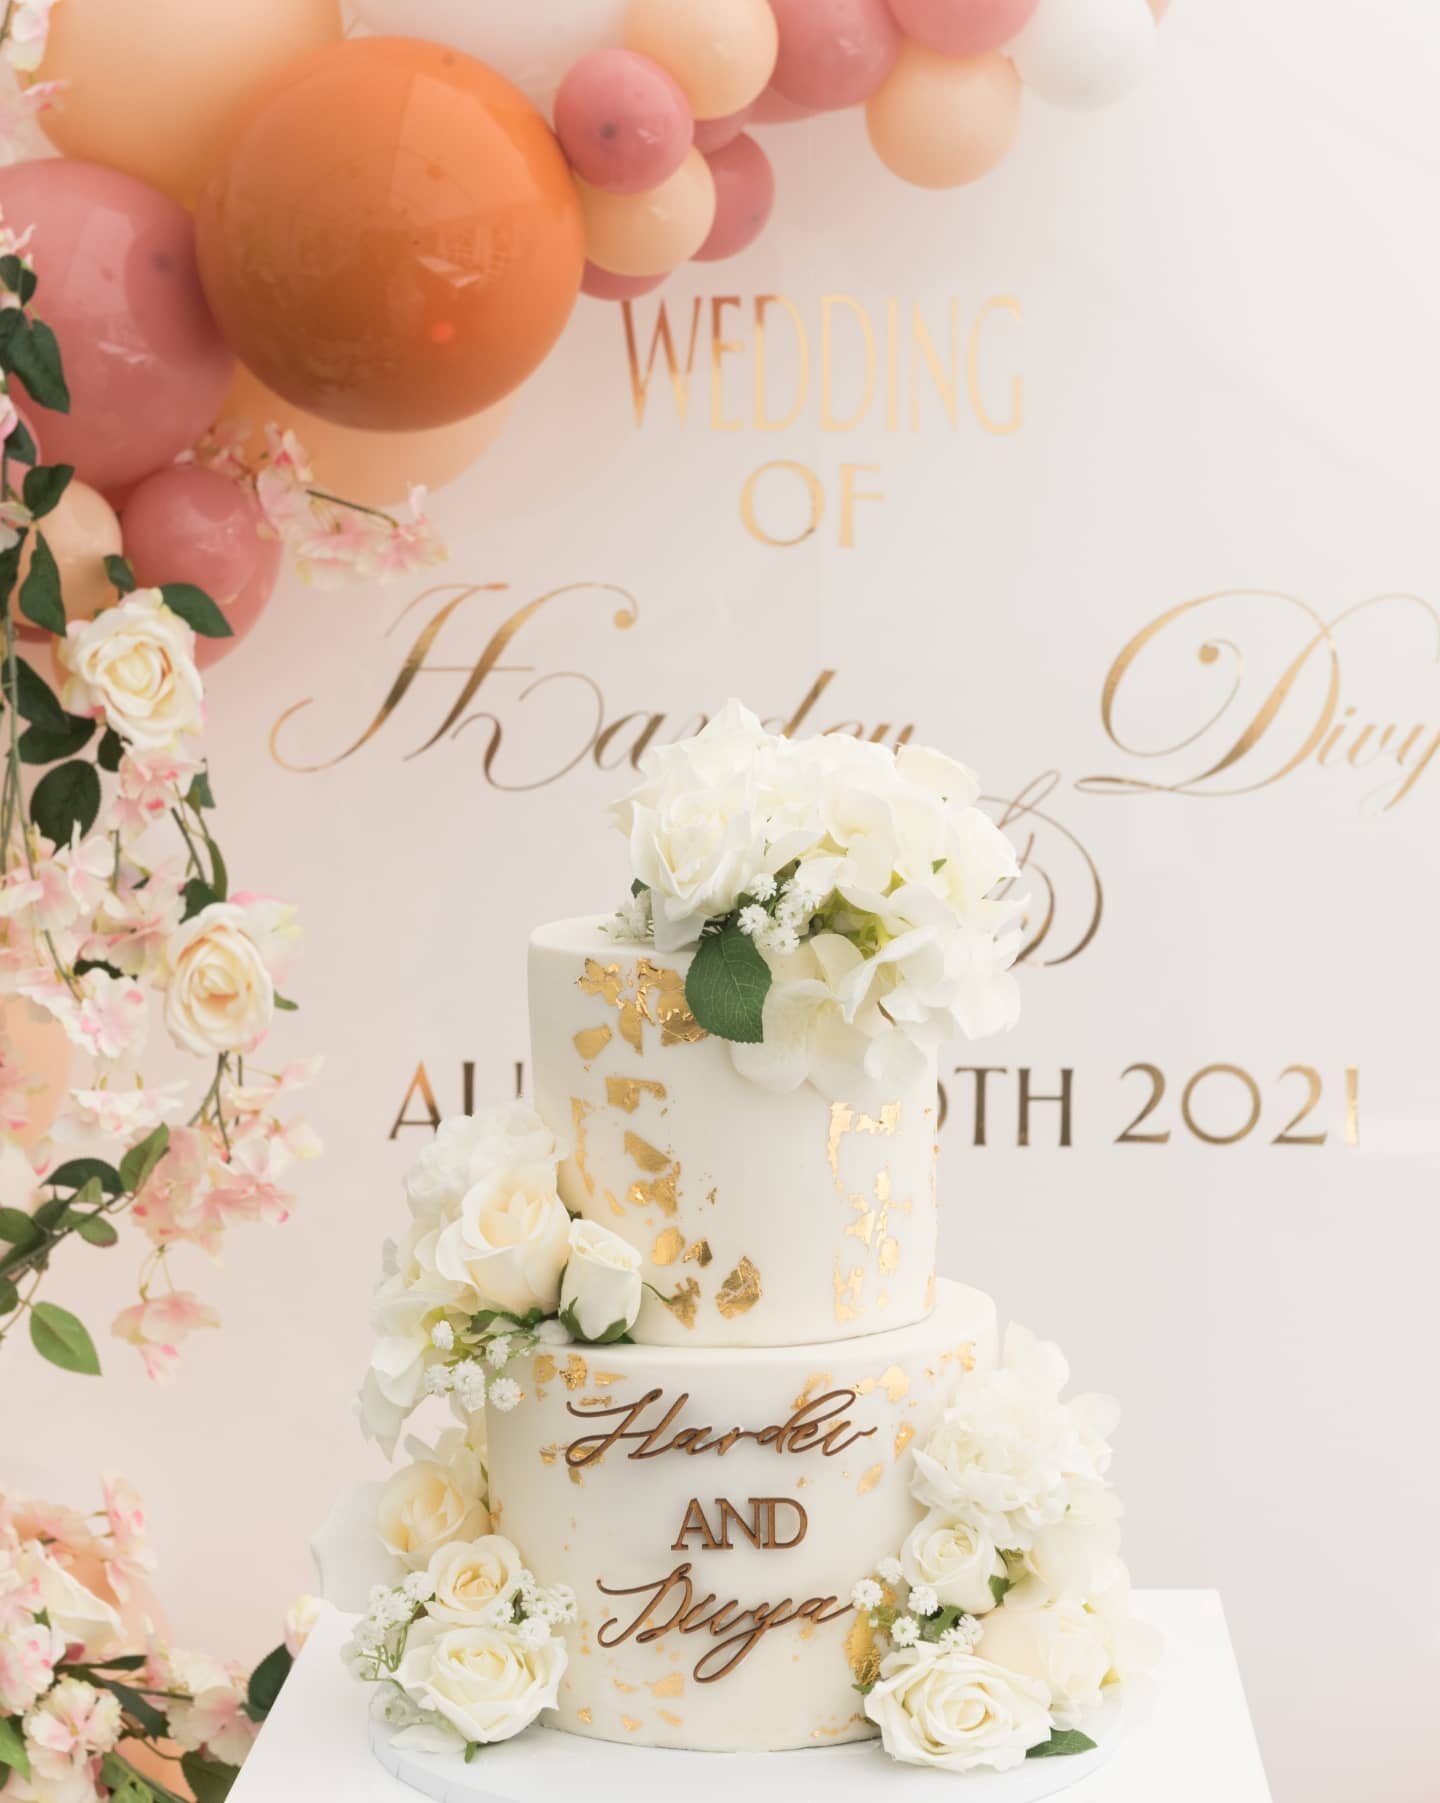 When it's all about the cake and the beautiful simple details, but most importantly it's cake!

#weddingphotography #weddingcake #weddingcakes #weddinginspiration #femalephotographer #decor #bridalinspo #asianwedding #instadaily #bridetobe #cakedecor